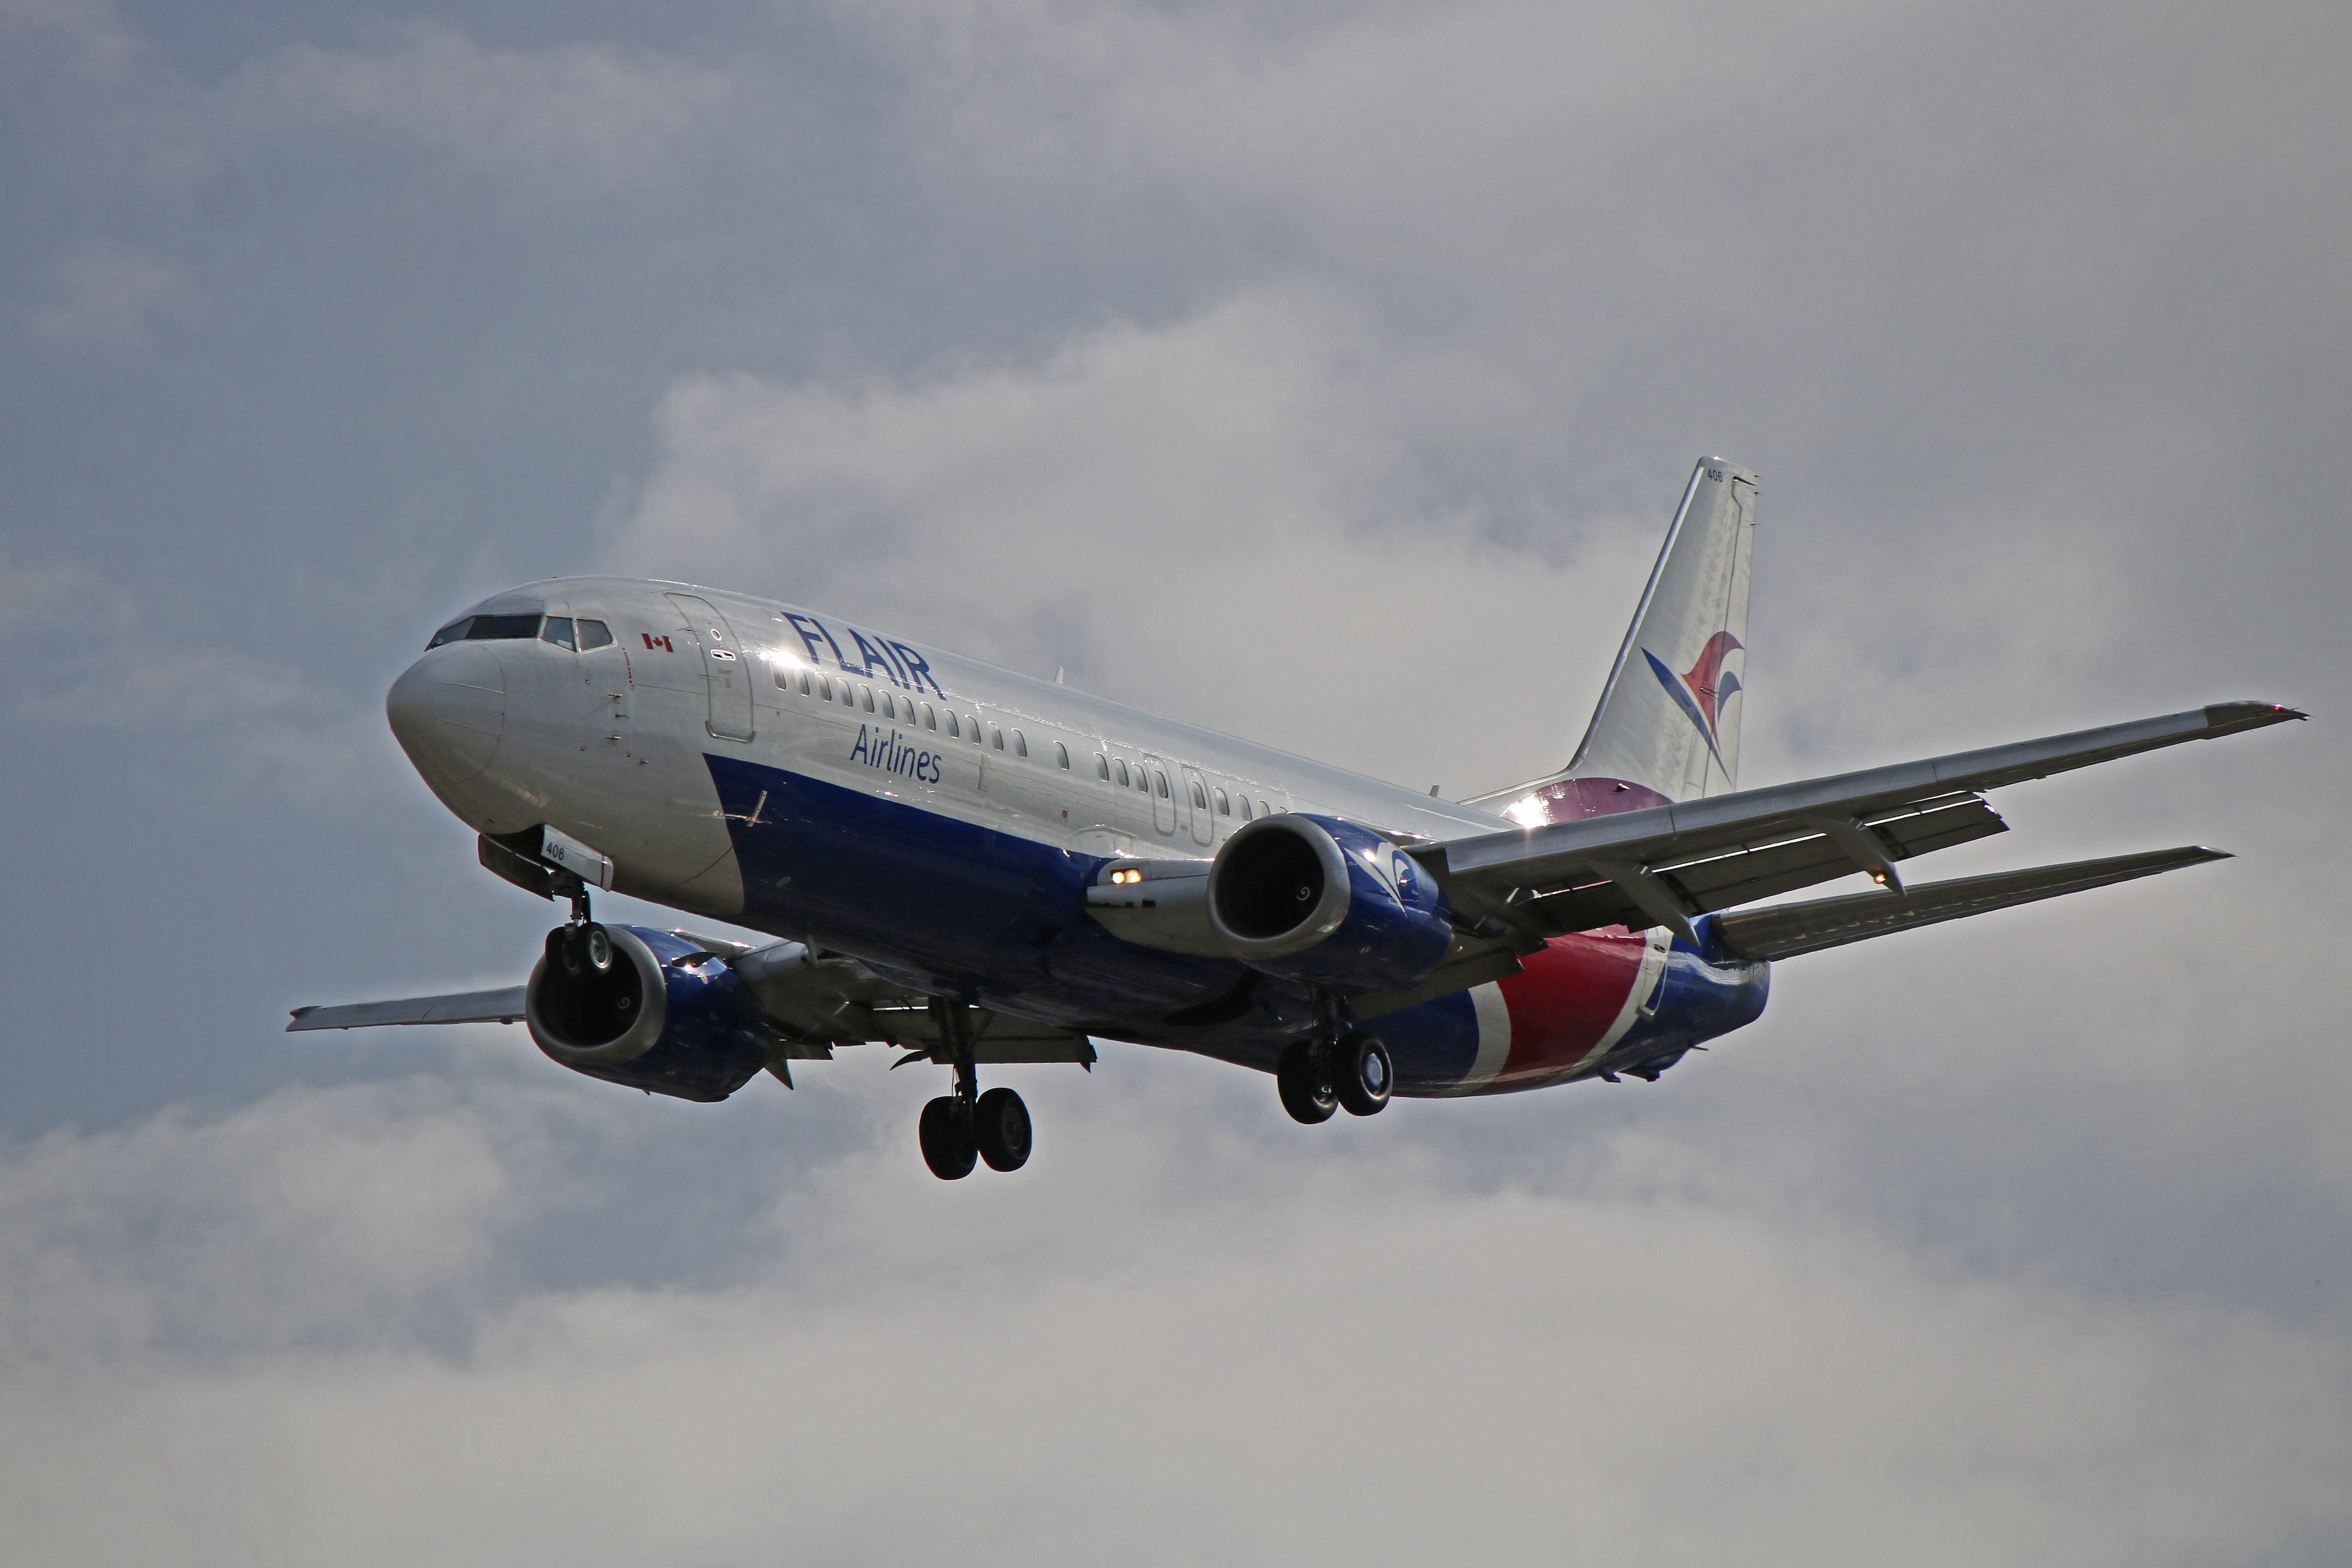 c-flrs flair airlines boeing 737-400